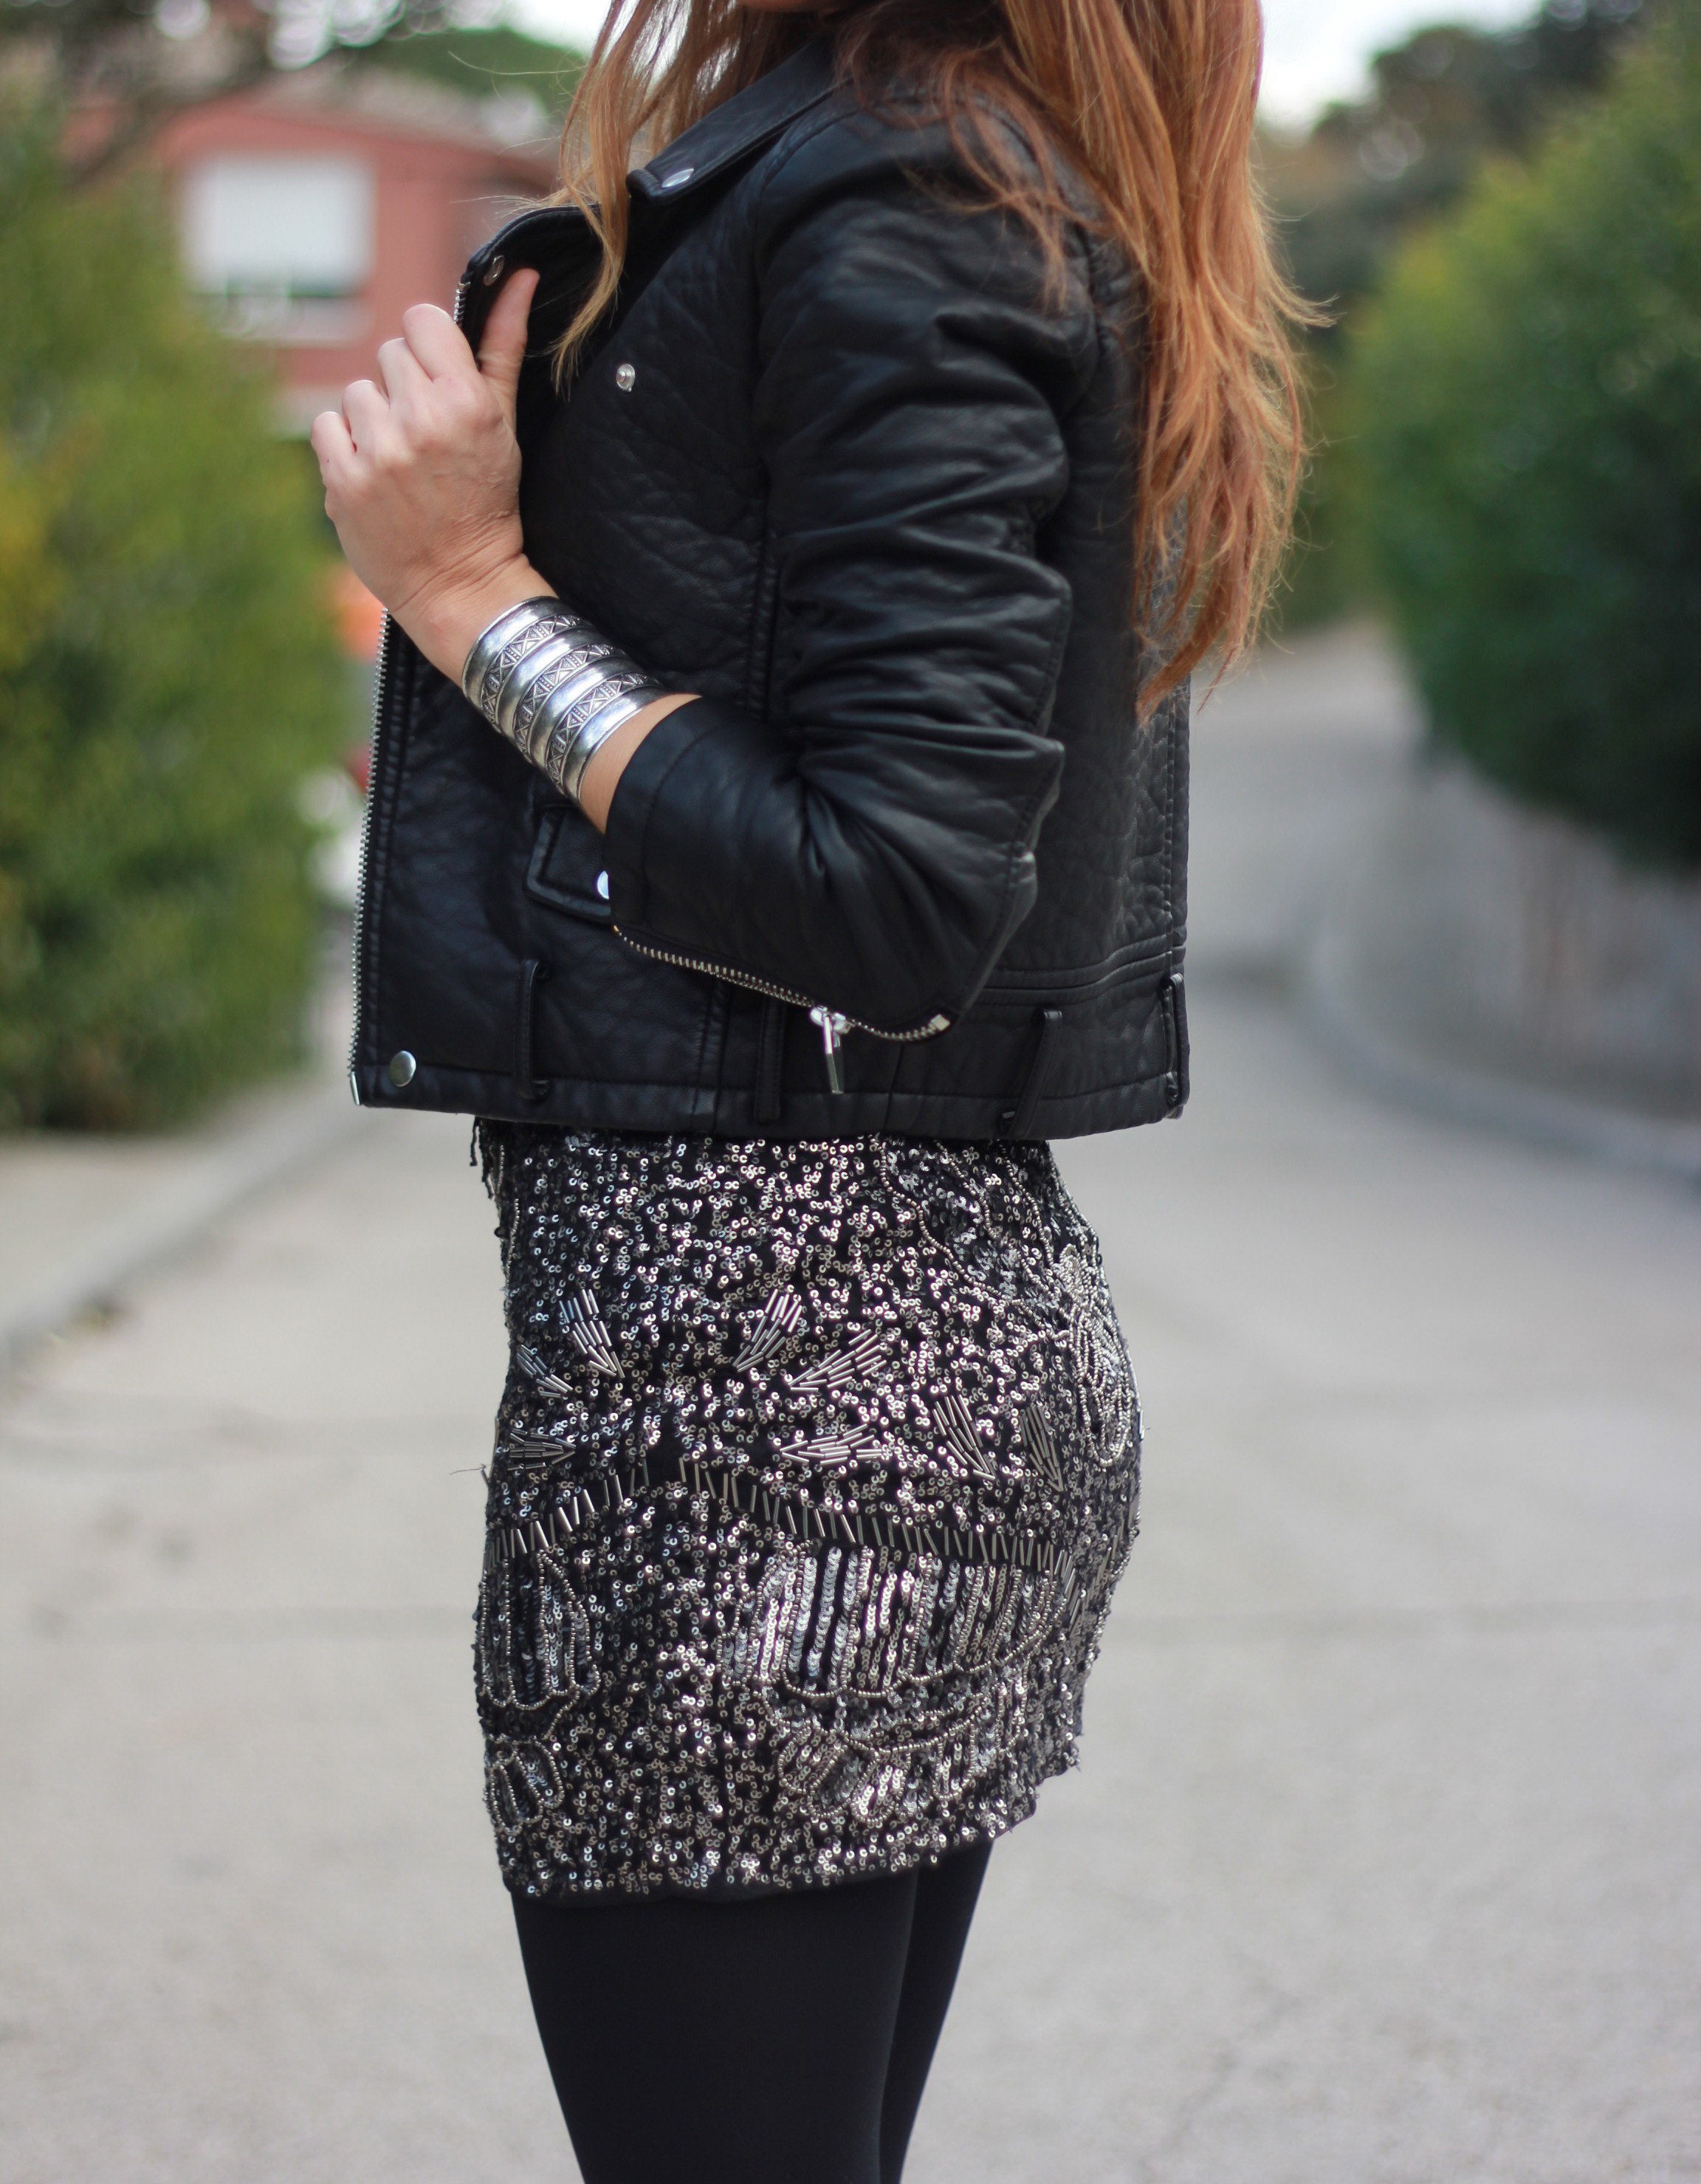 Black Sequin Mini Skirt Outfit